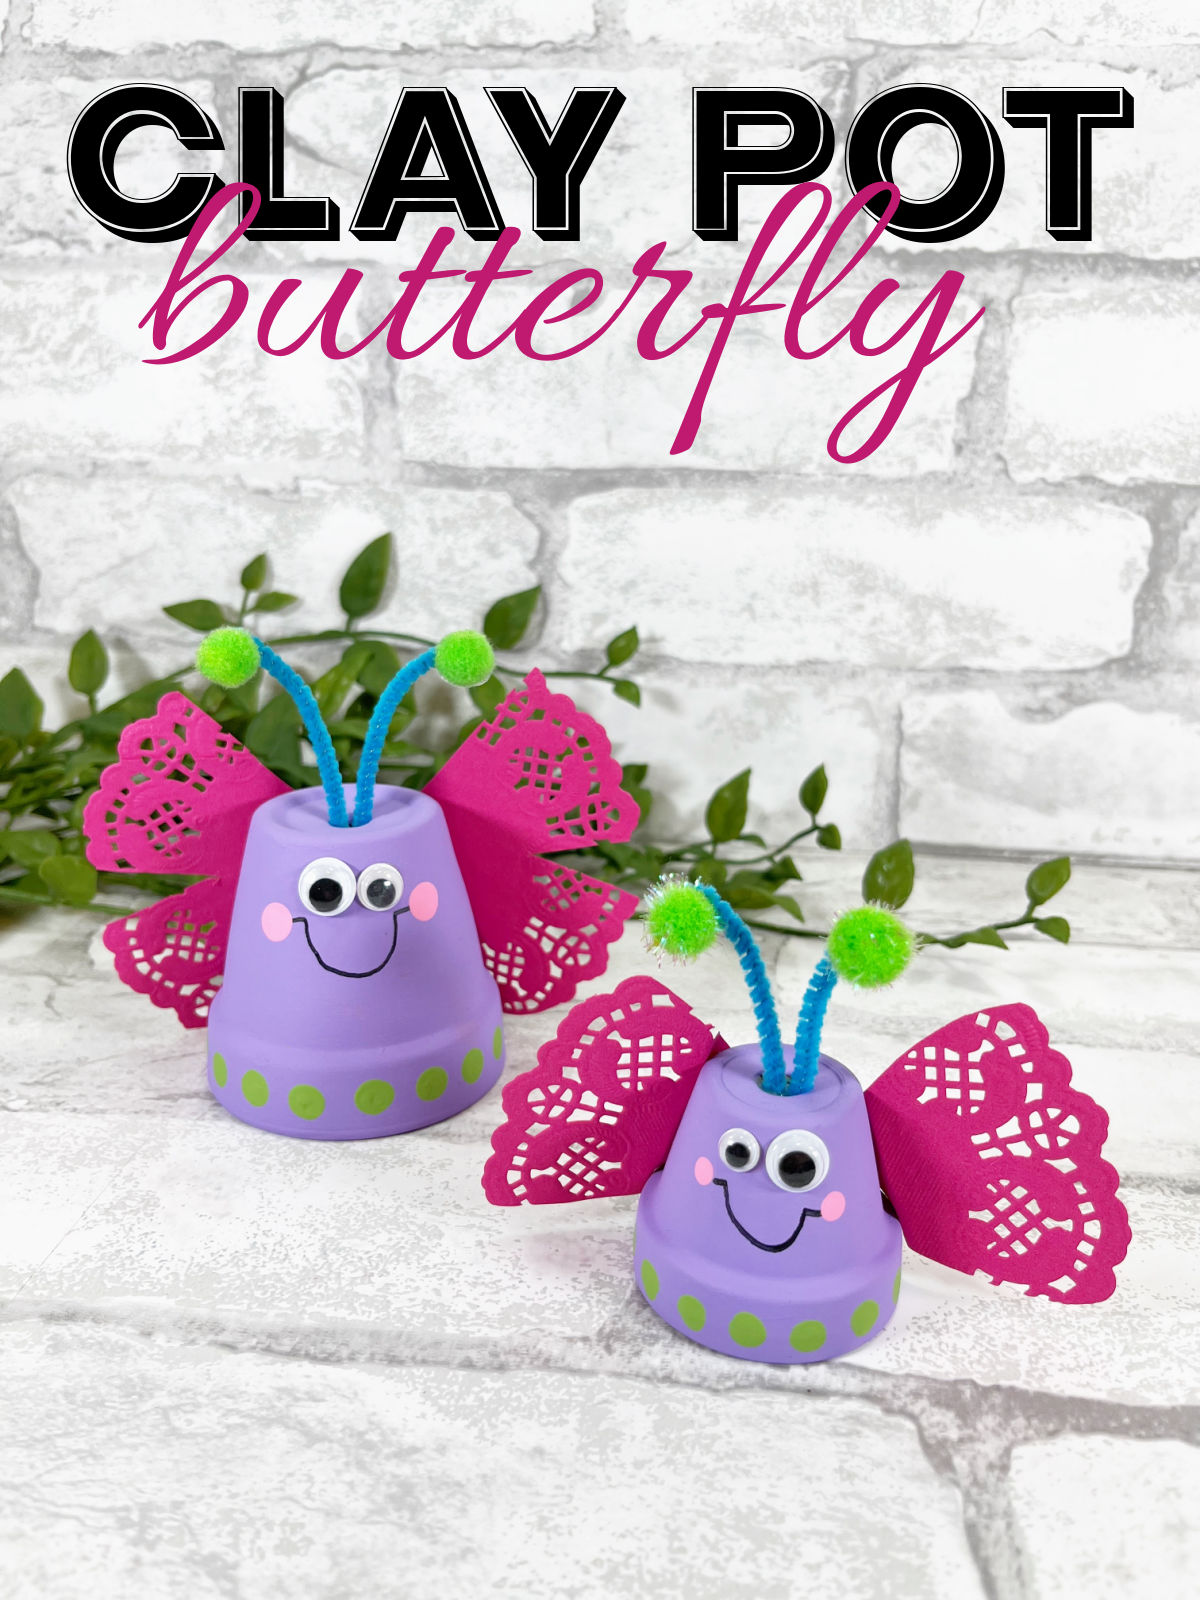 Clay Pot Butterfly Craft on a brick background